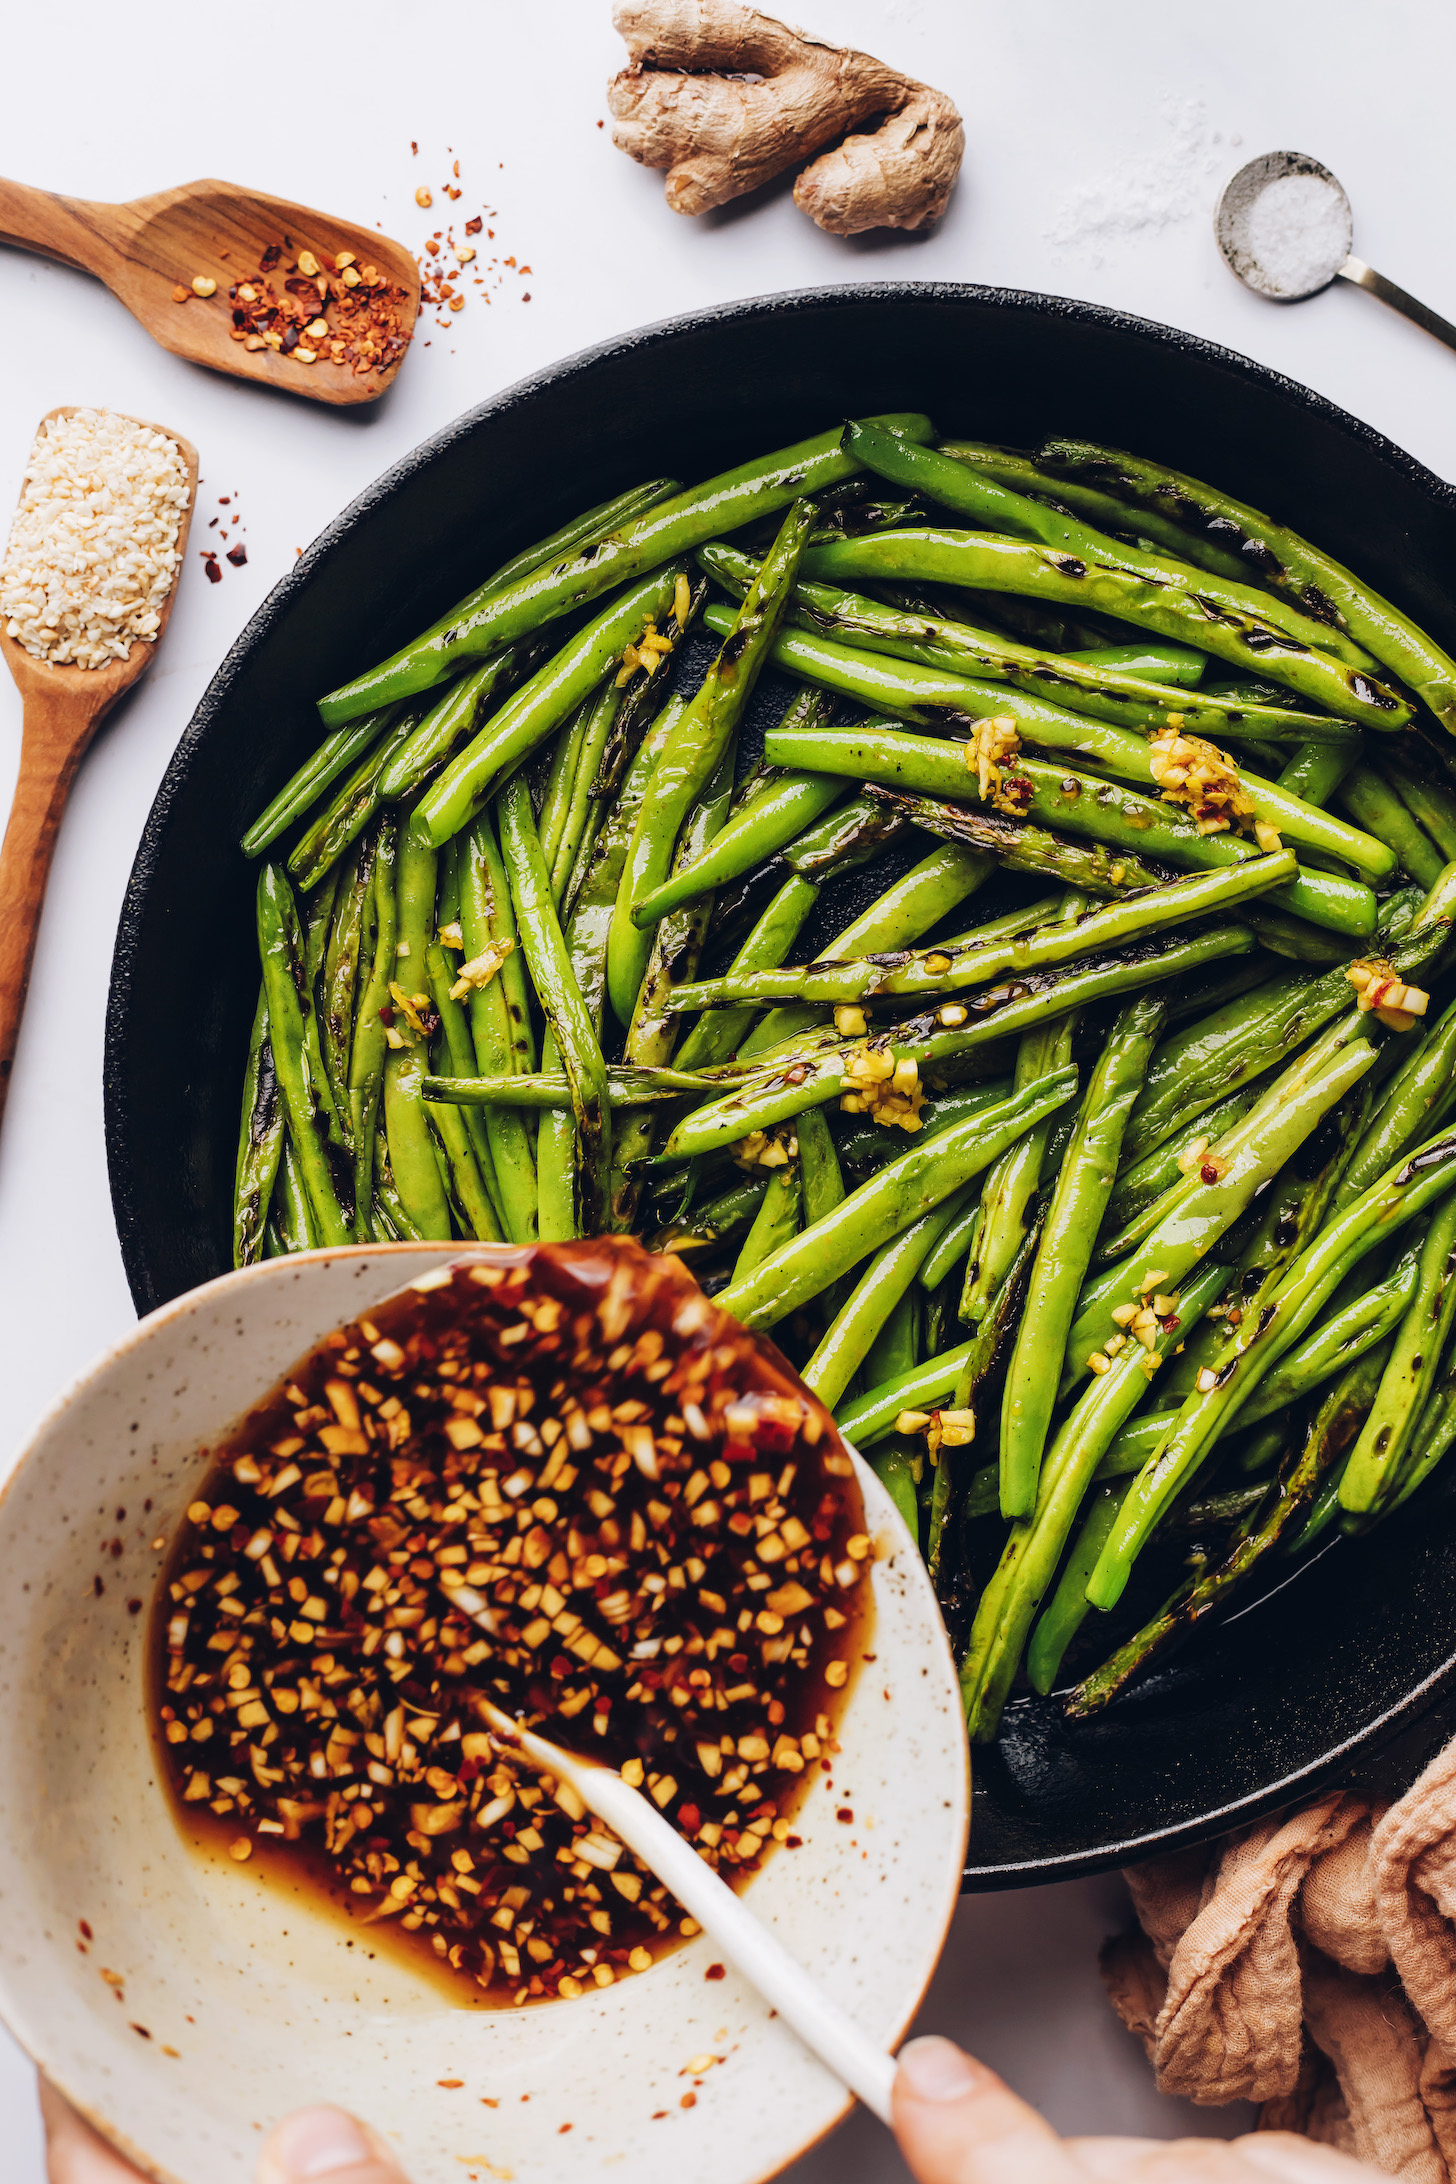 Pouring a savory Asian-inspired sauce into a skillet of blistered green beans